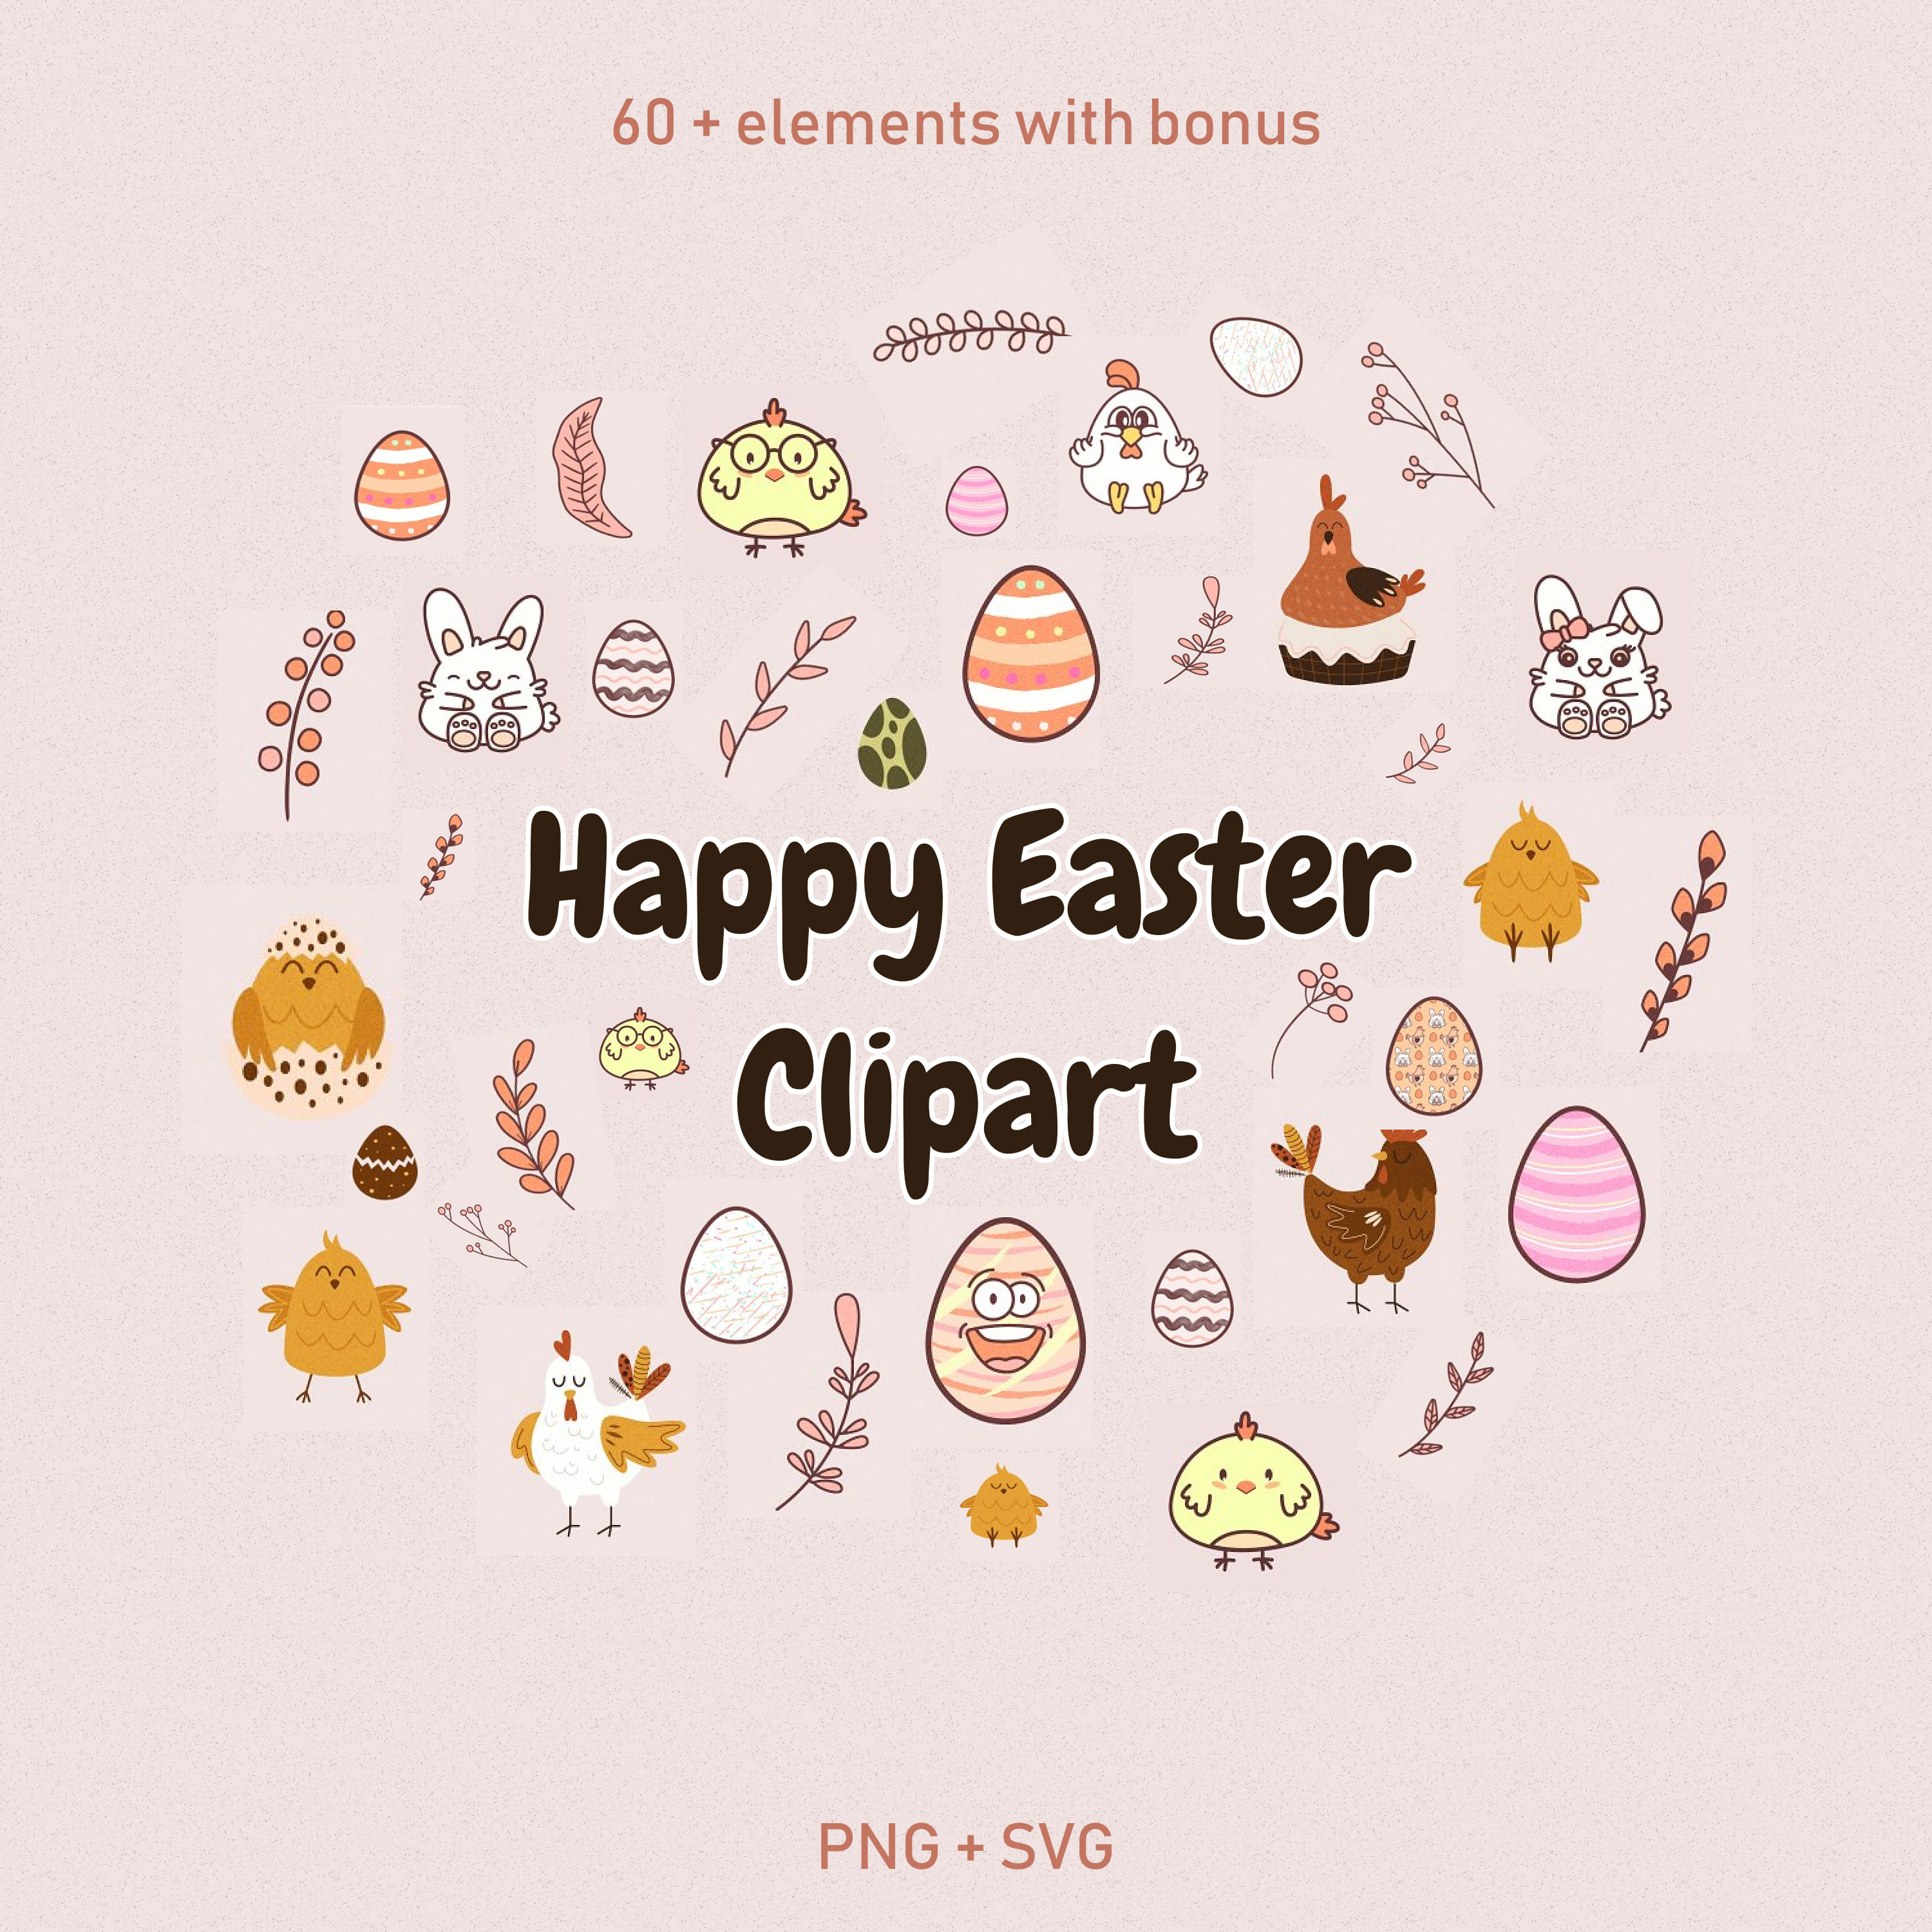 Happy Easter Clipart 1500x1500 1.